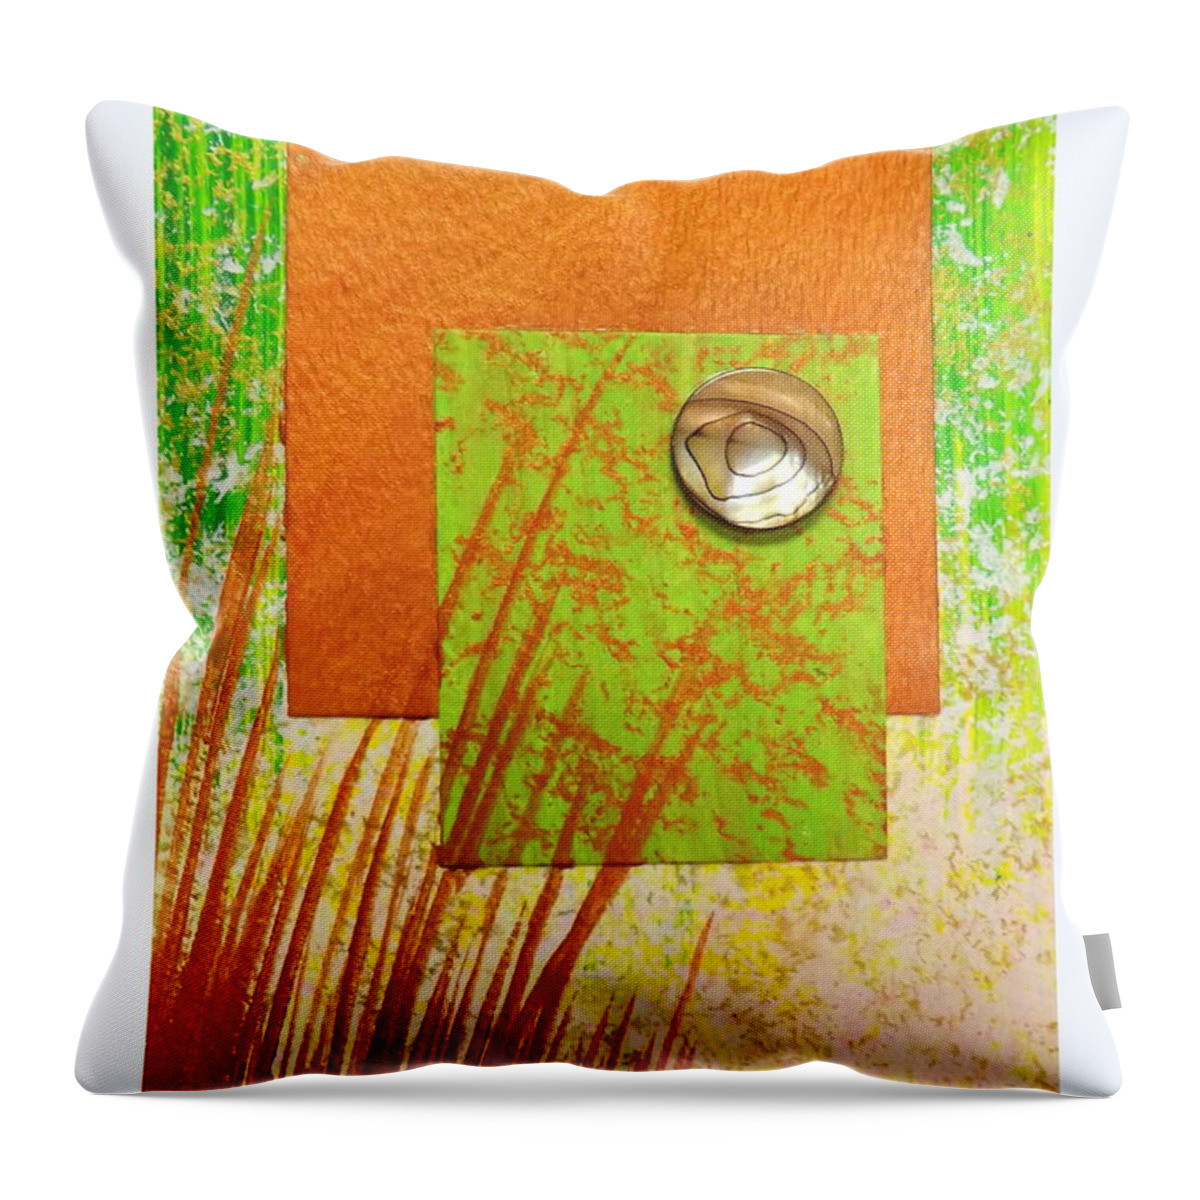 Copper Sunset Throw Pillow featuring the painting Copper Sunset by Darren Robinson